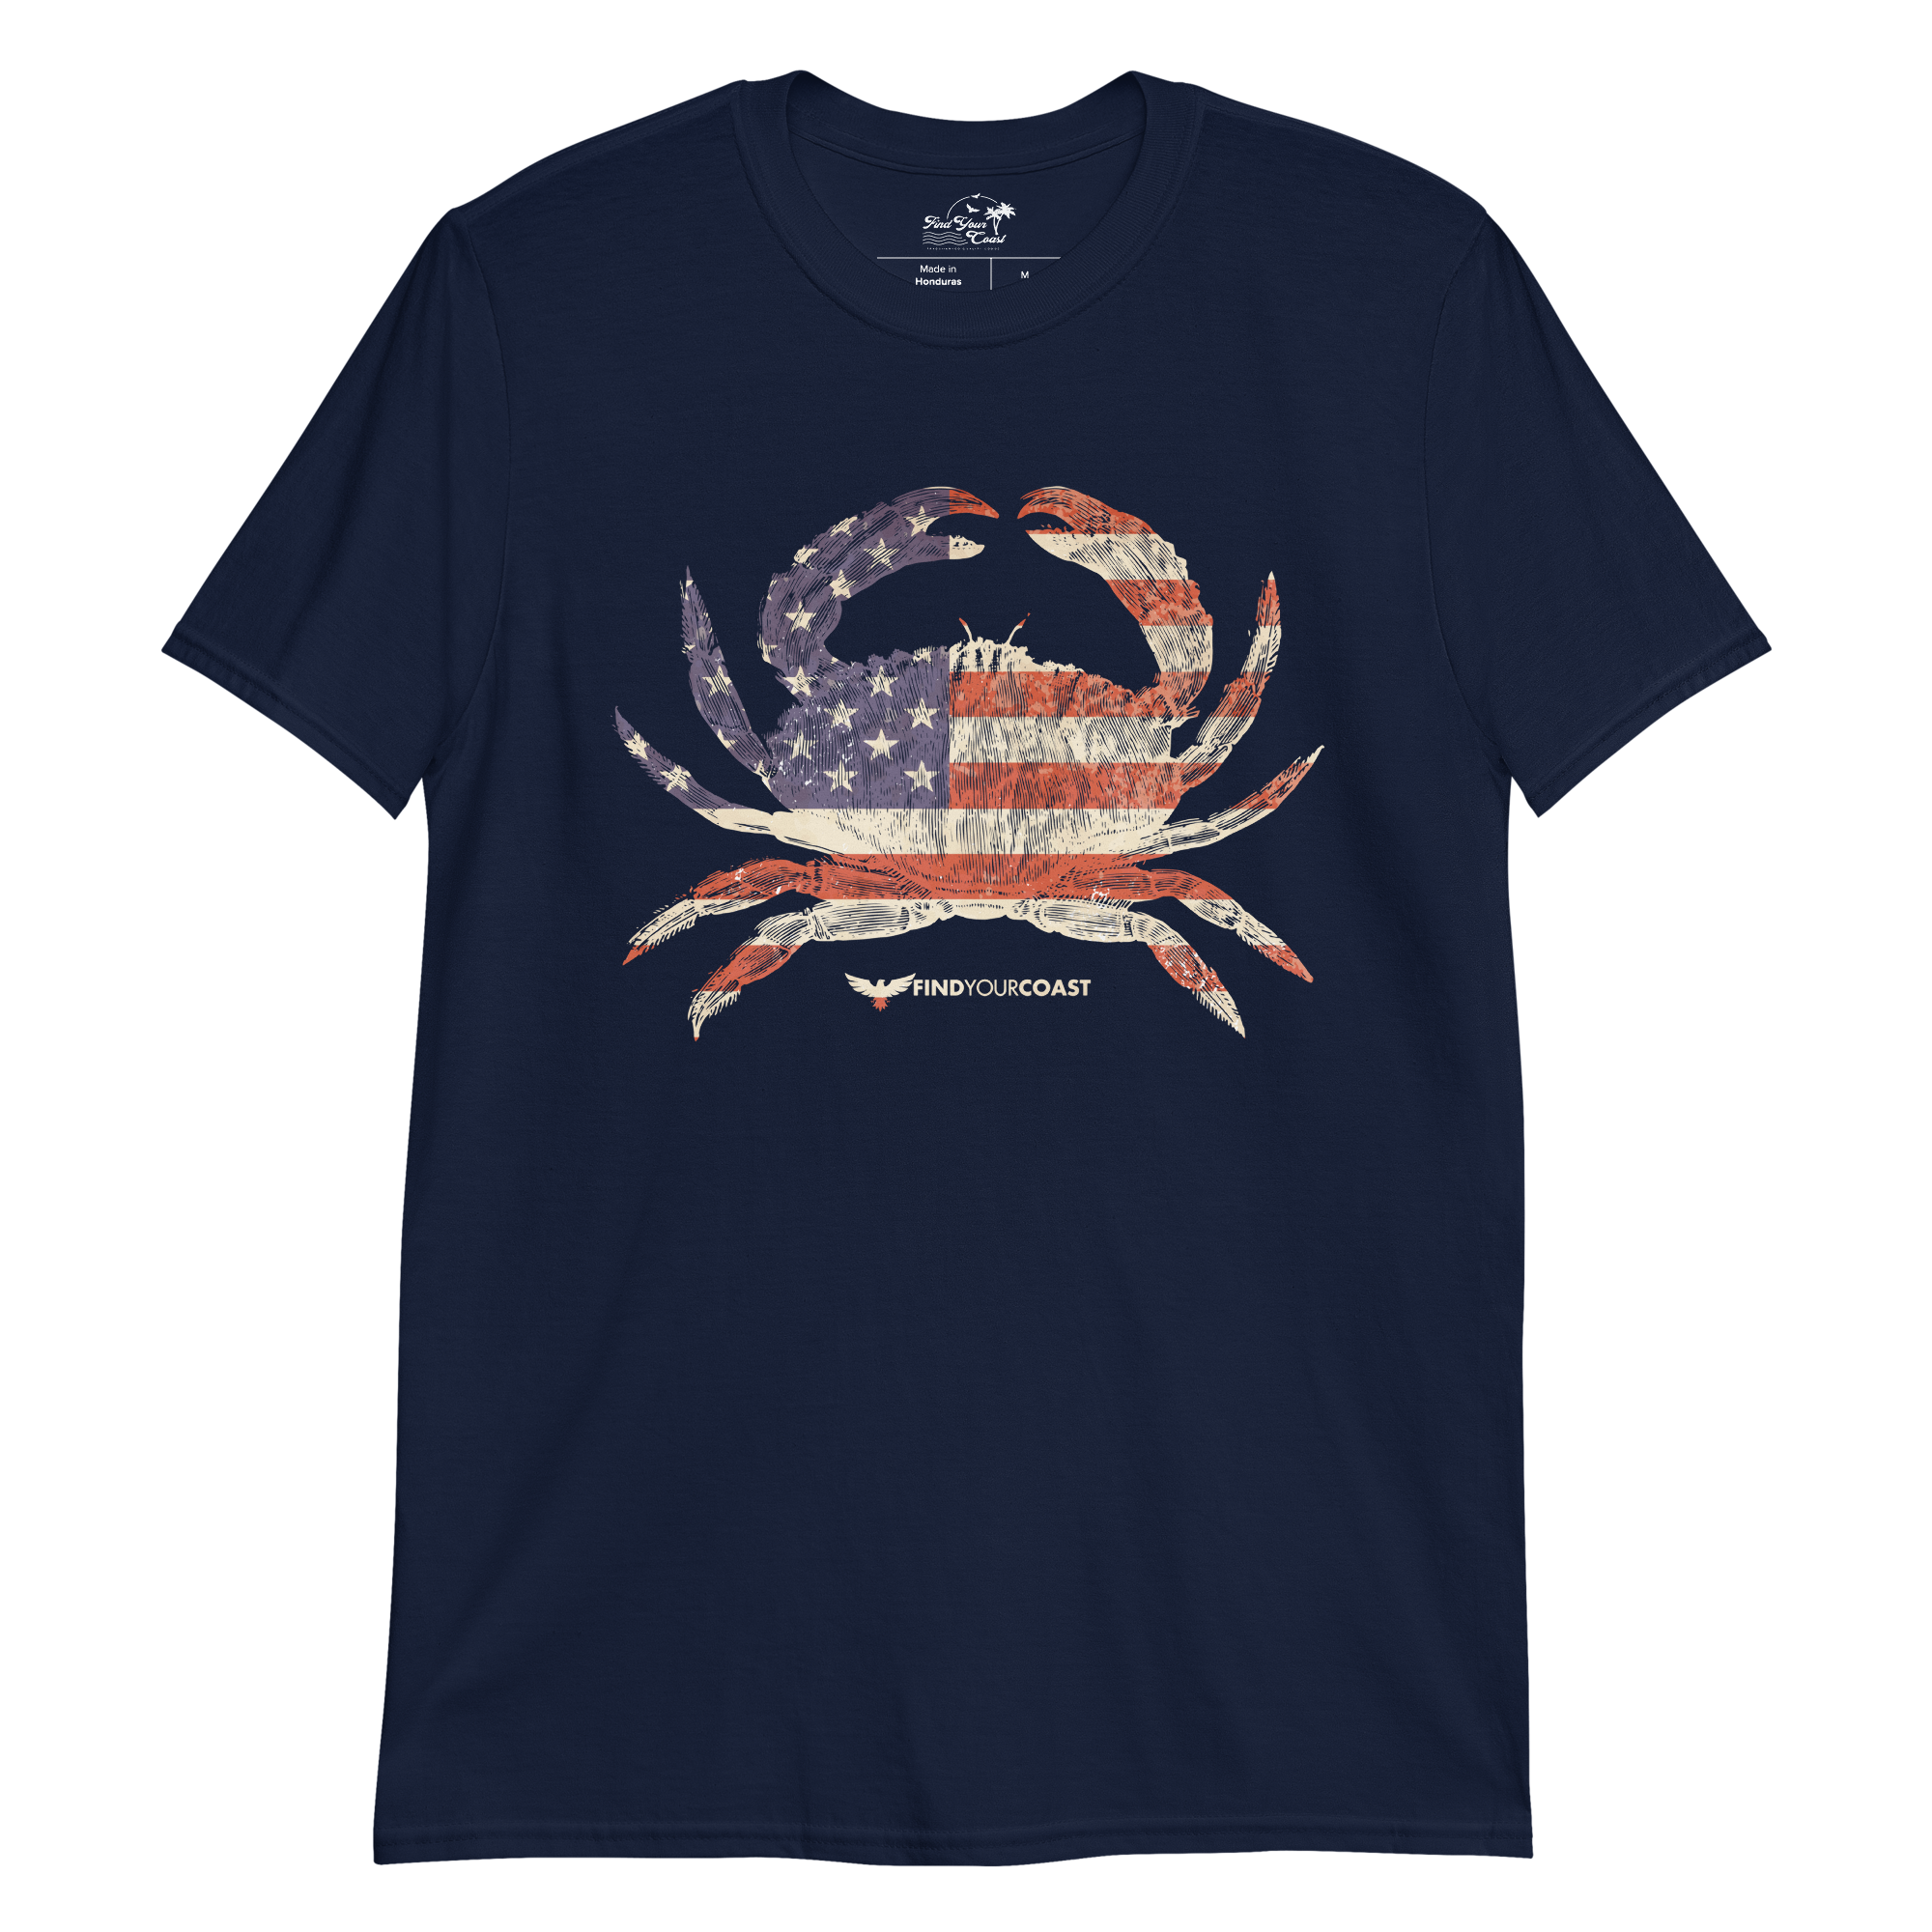 American Crab Navy and Black Cotton Tee Shirt FIND YOUR COAST  CO